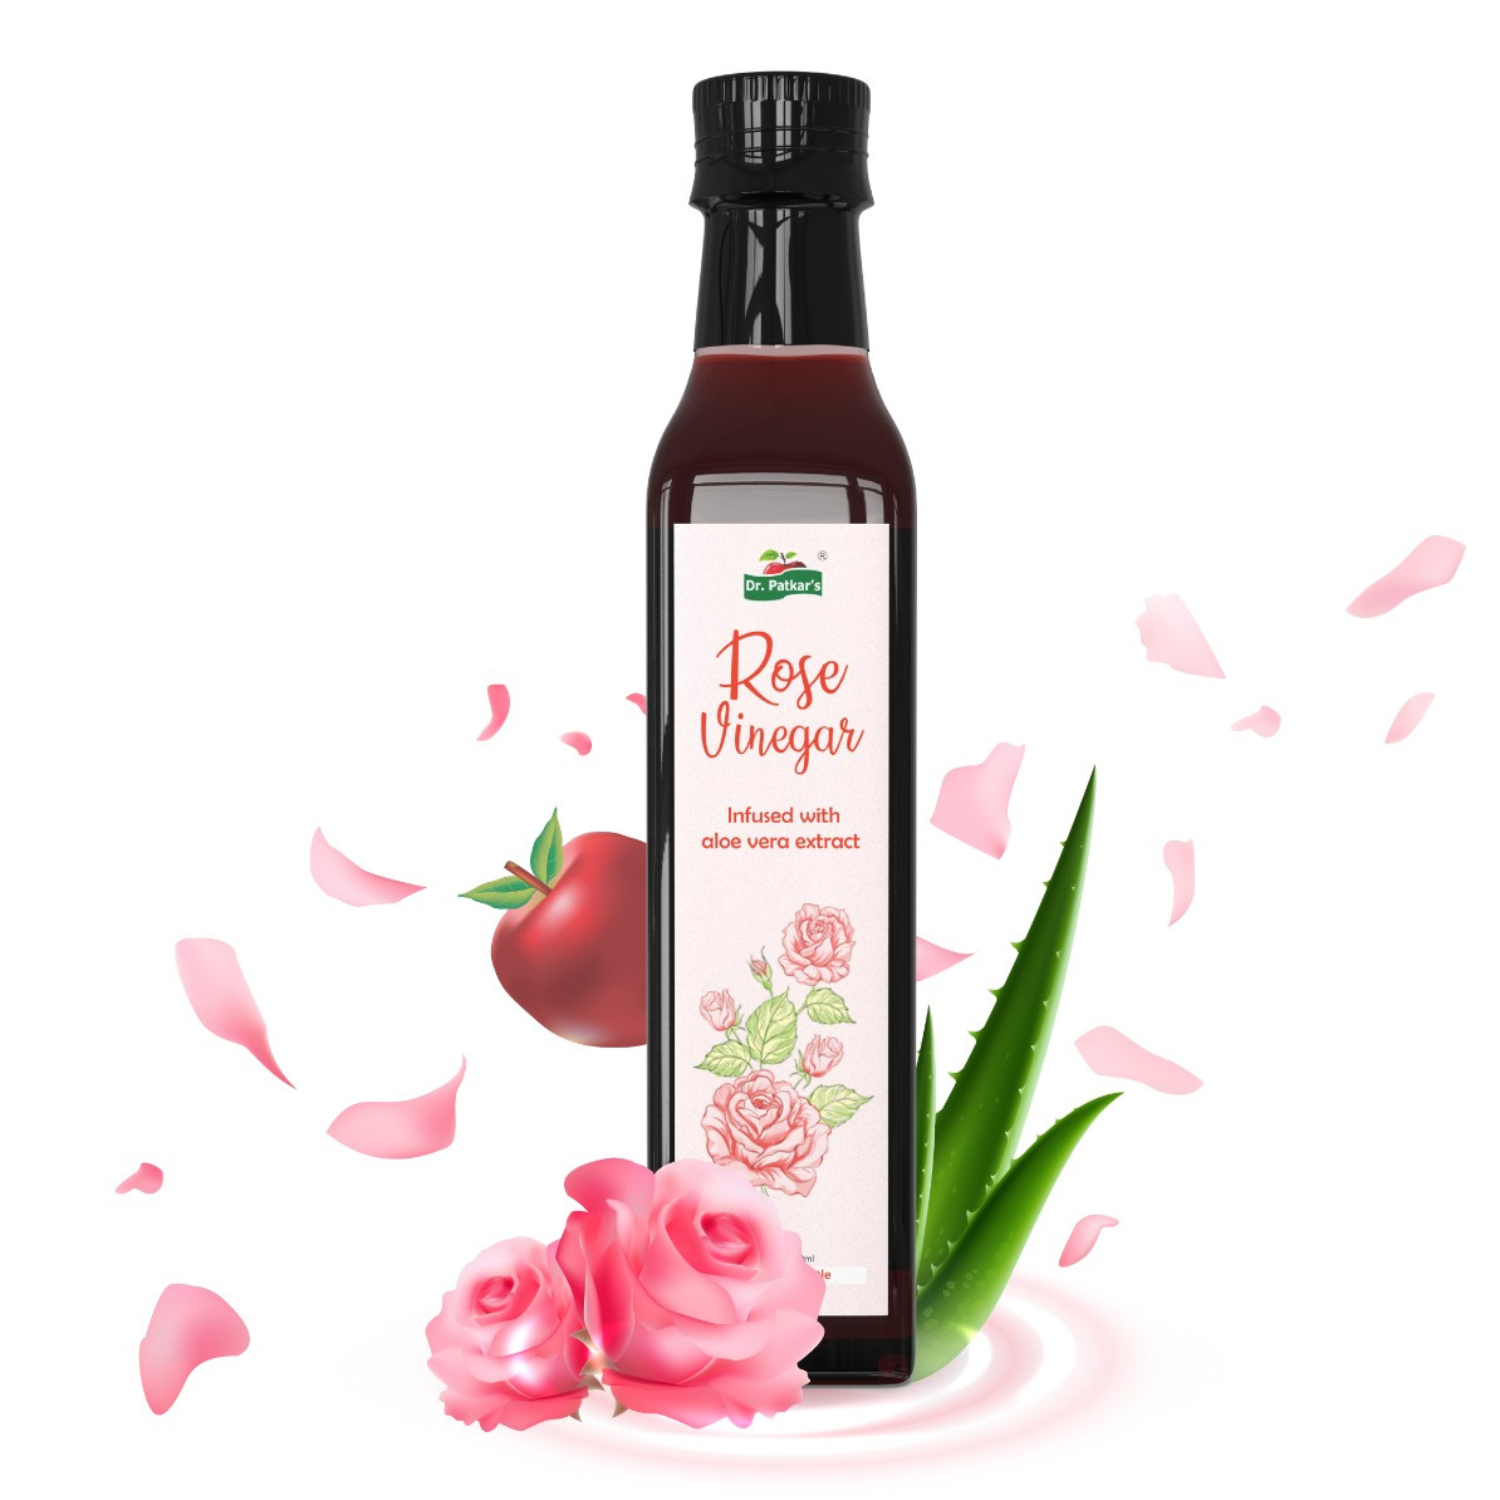 Dr. Patkar's Rose Vinegar Infused With Aloevera Extract 250ml